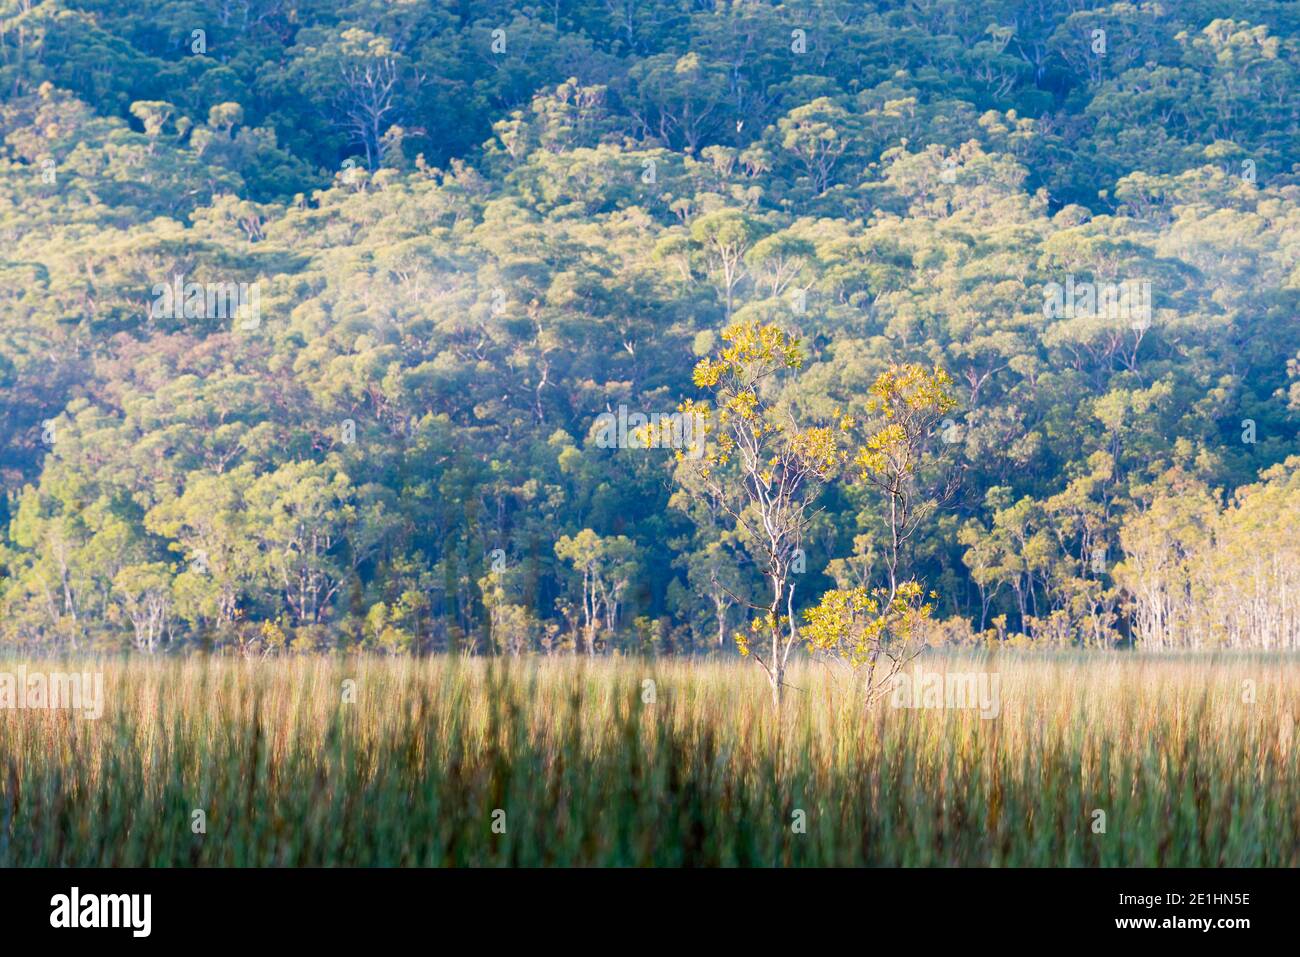 A single native Grevillea shrub stands above reed beds and marshes in a wetland area on the eastern edge of the Tomaree National Park at Shoal Bay NSW Stock Photo